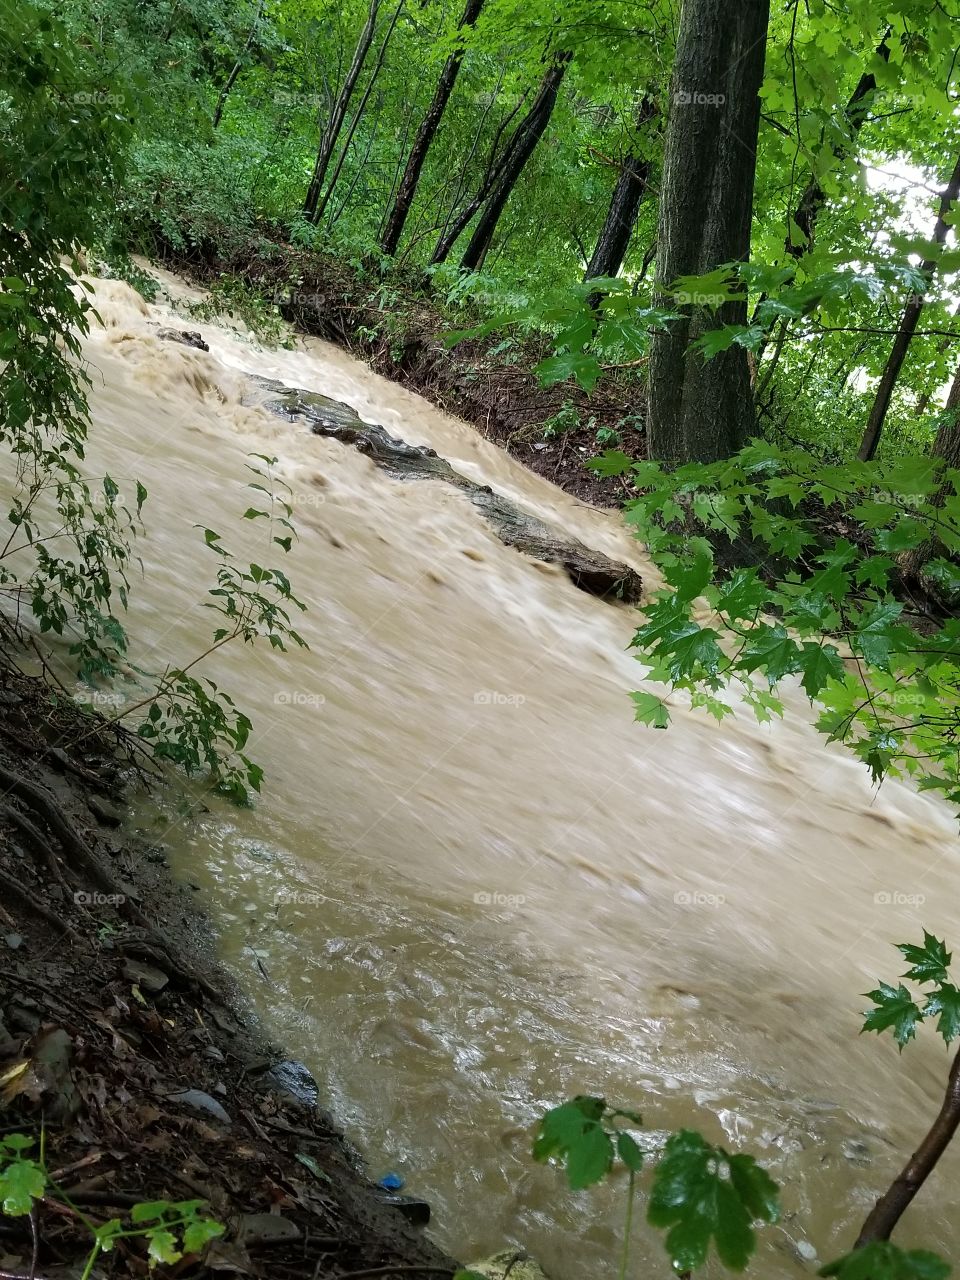 A usually dry creek, 24 hours of rain. Flash flooding, August 2018.